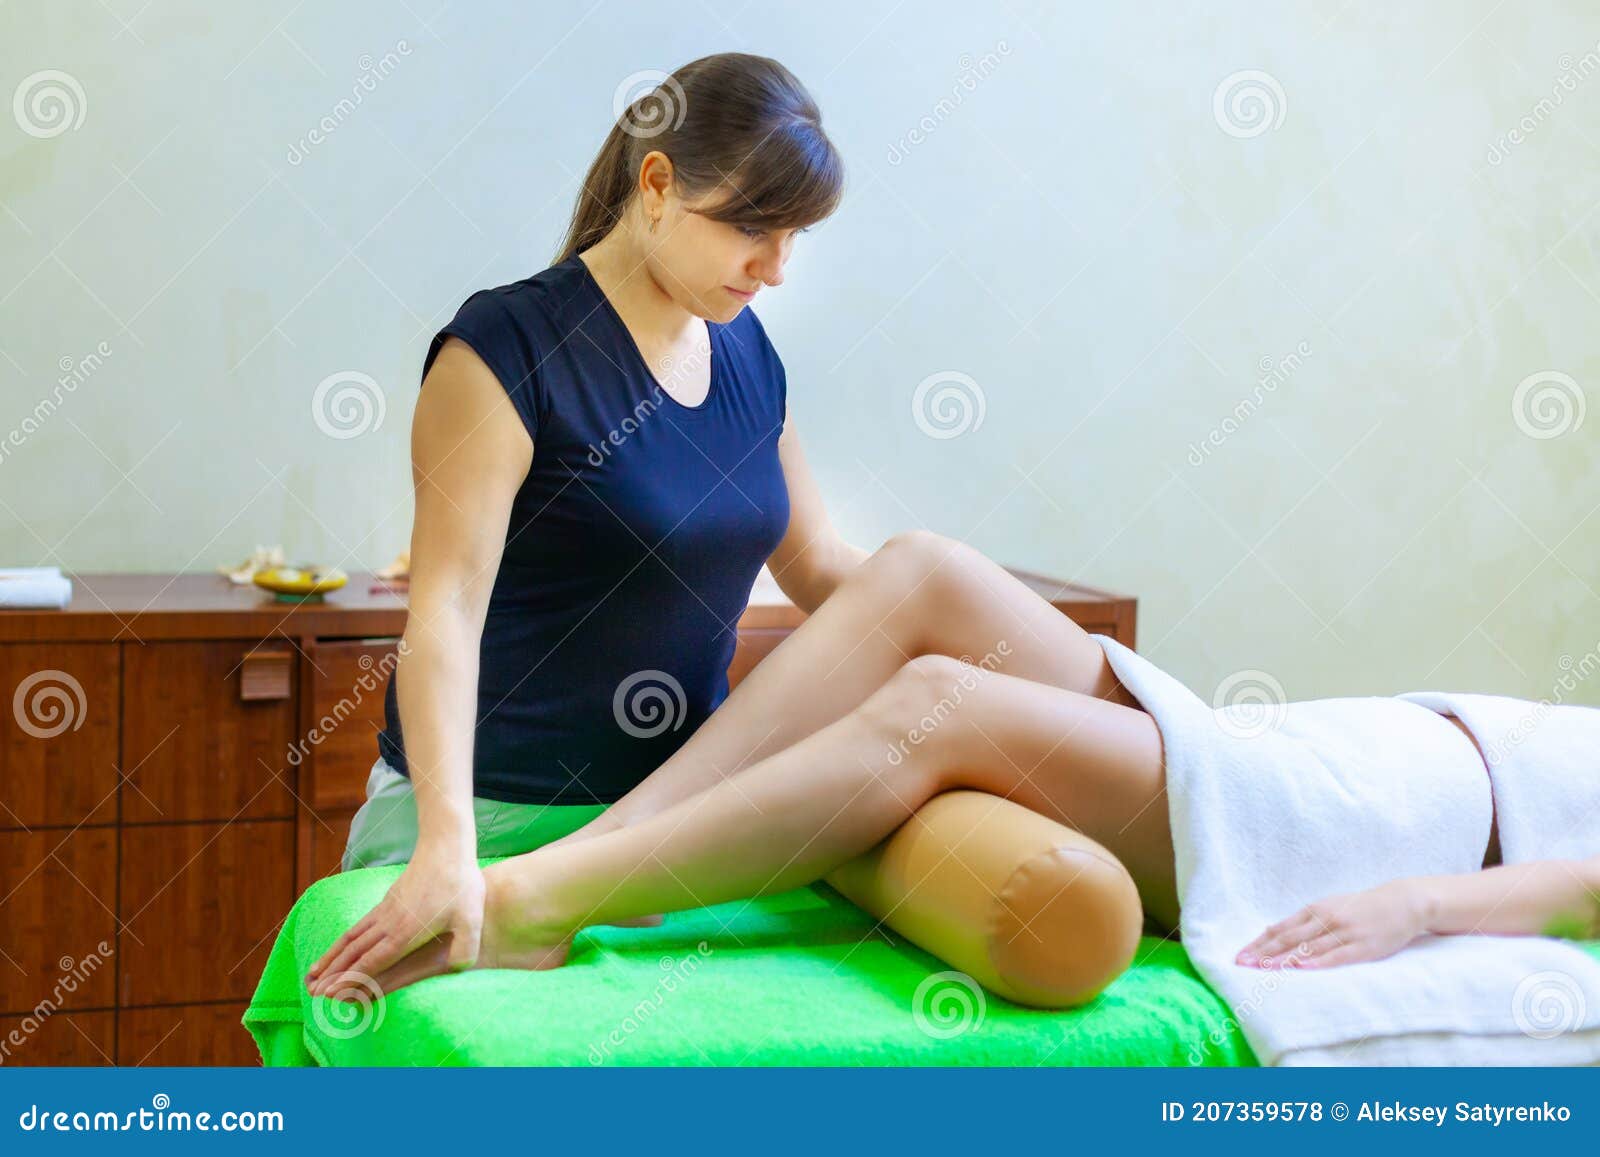 Side View Of Professional Massage Therapist Giving Massage On Woman Legs In The Spa Salon Stock